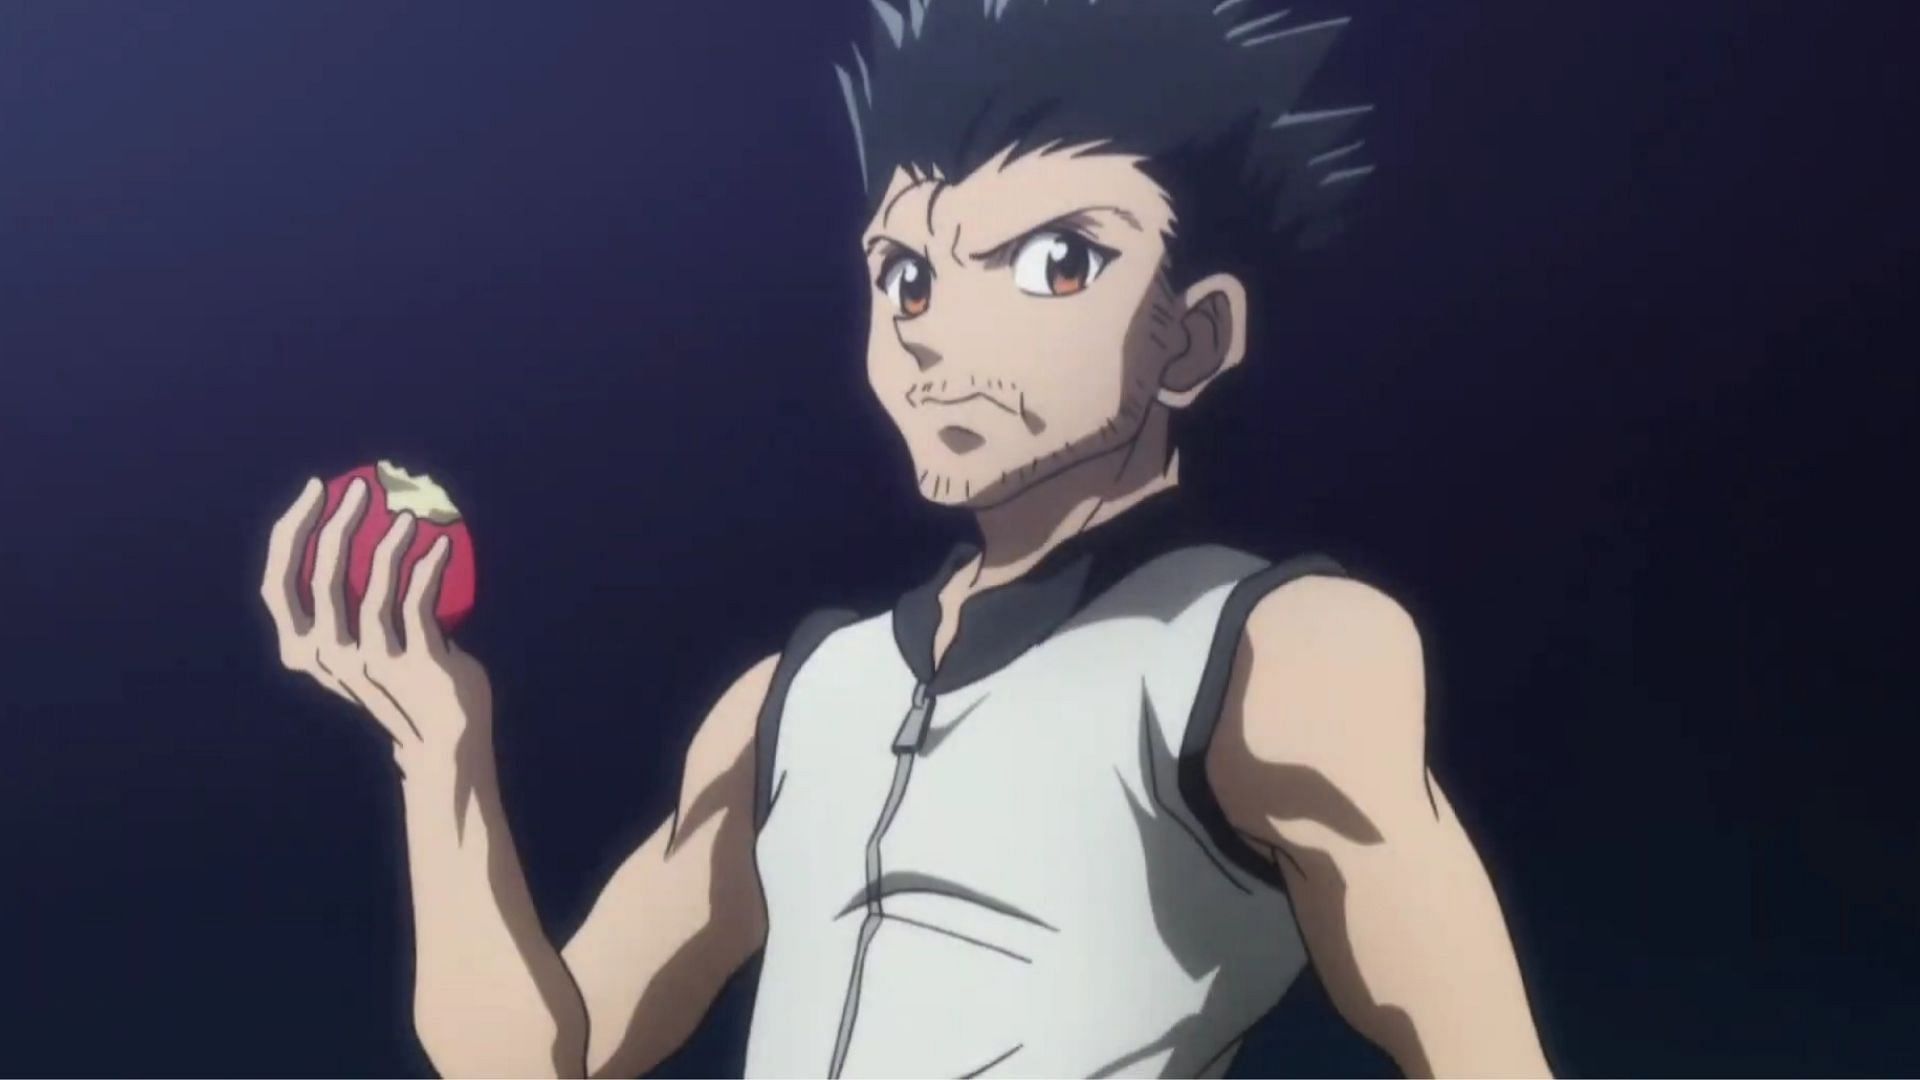 How powerful is Ging Freecss in Hunter x Hunter compared to Gon